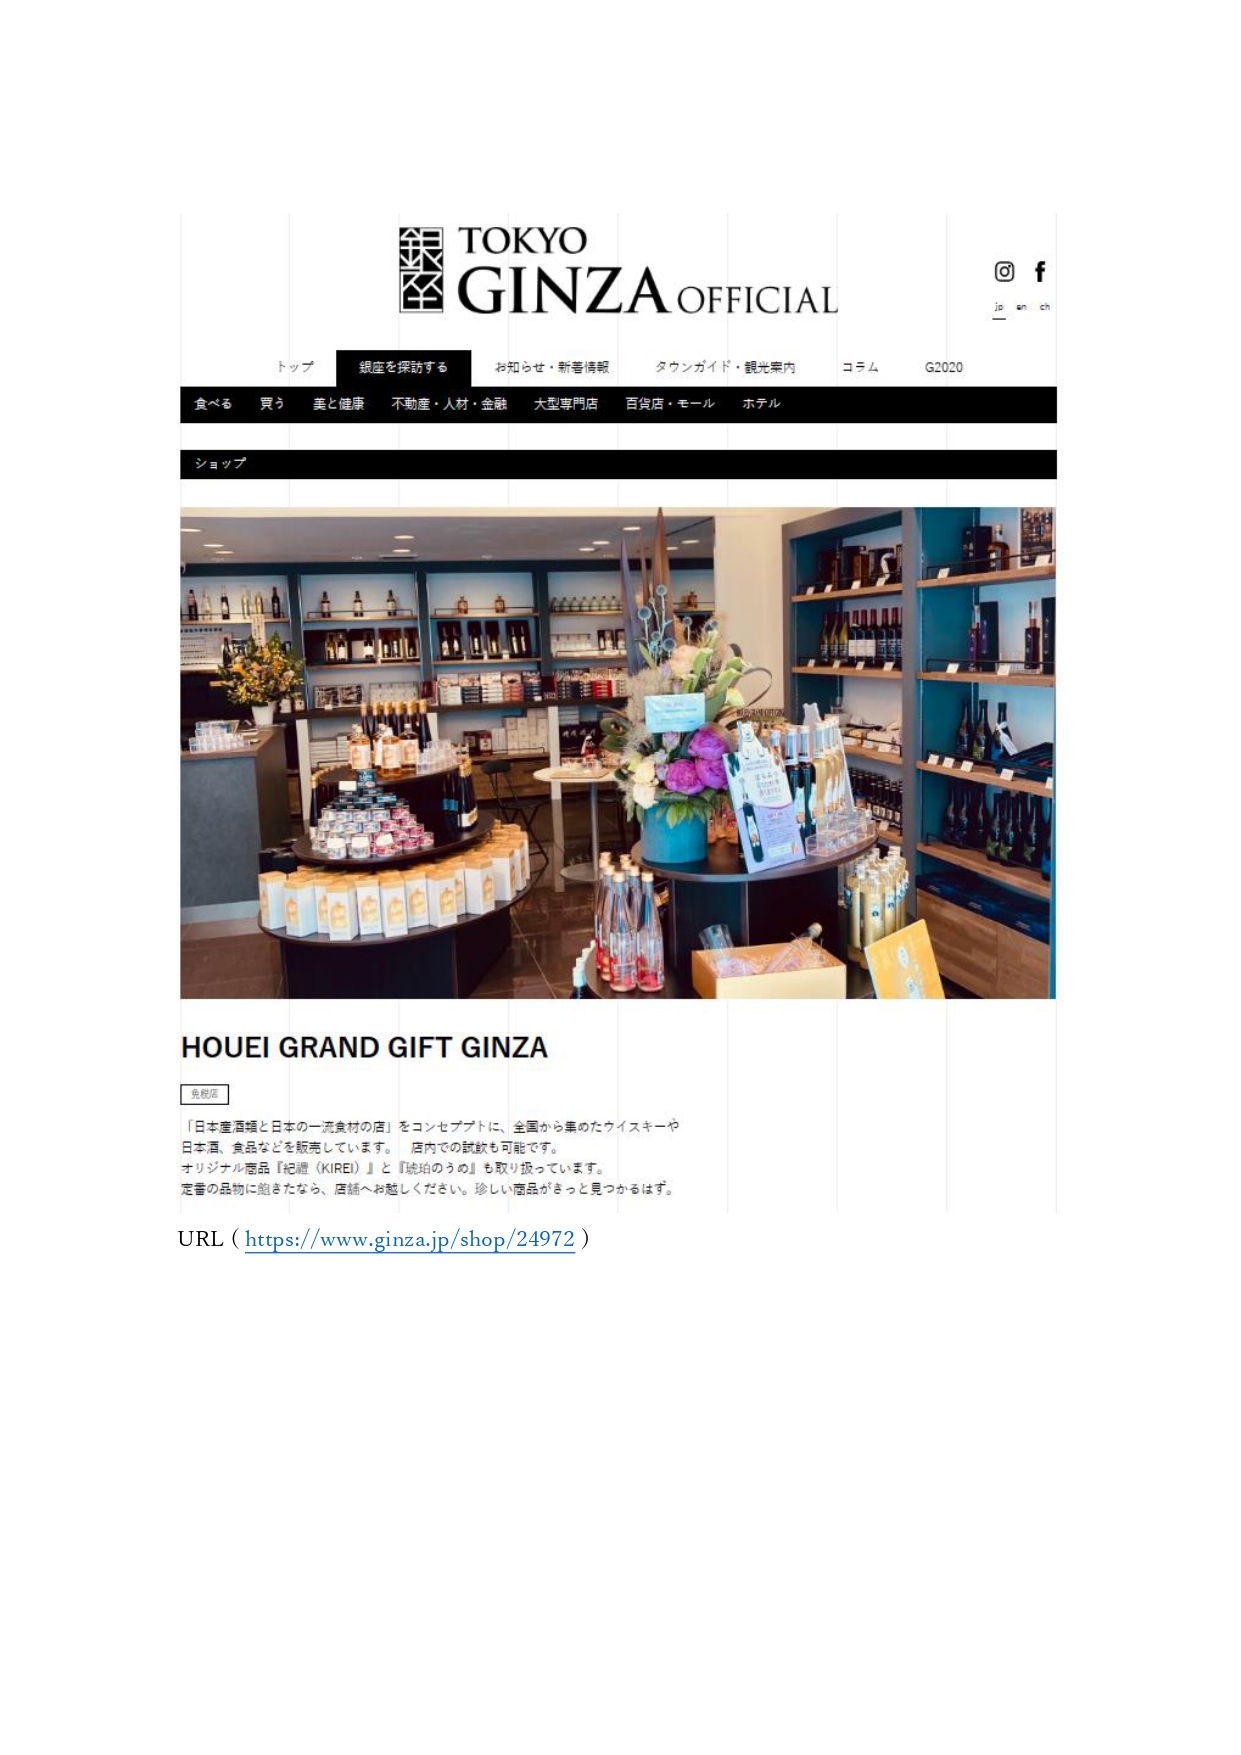 『TOKYO GINZA OFFICIAL』に「HOUEI GRAND GINZA」の紹介を掲載しました！！